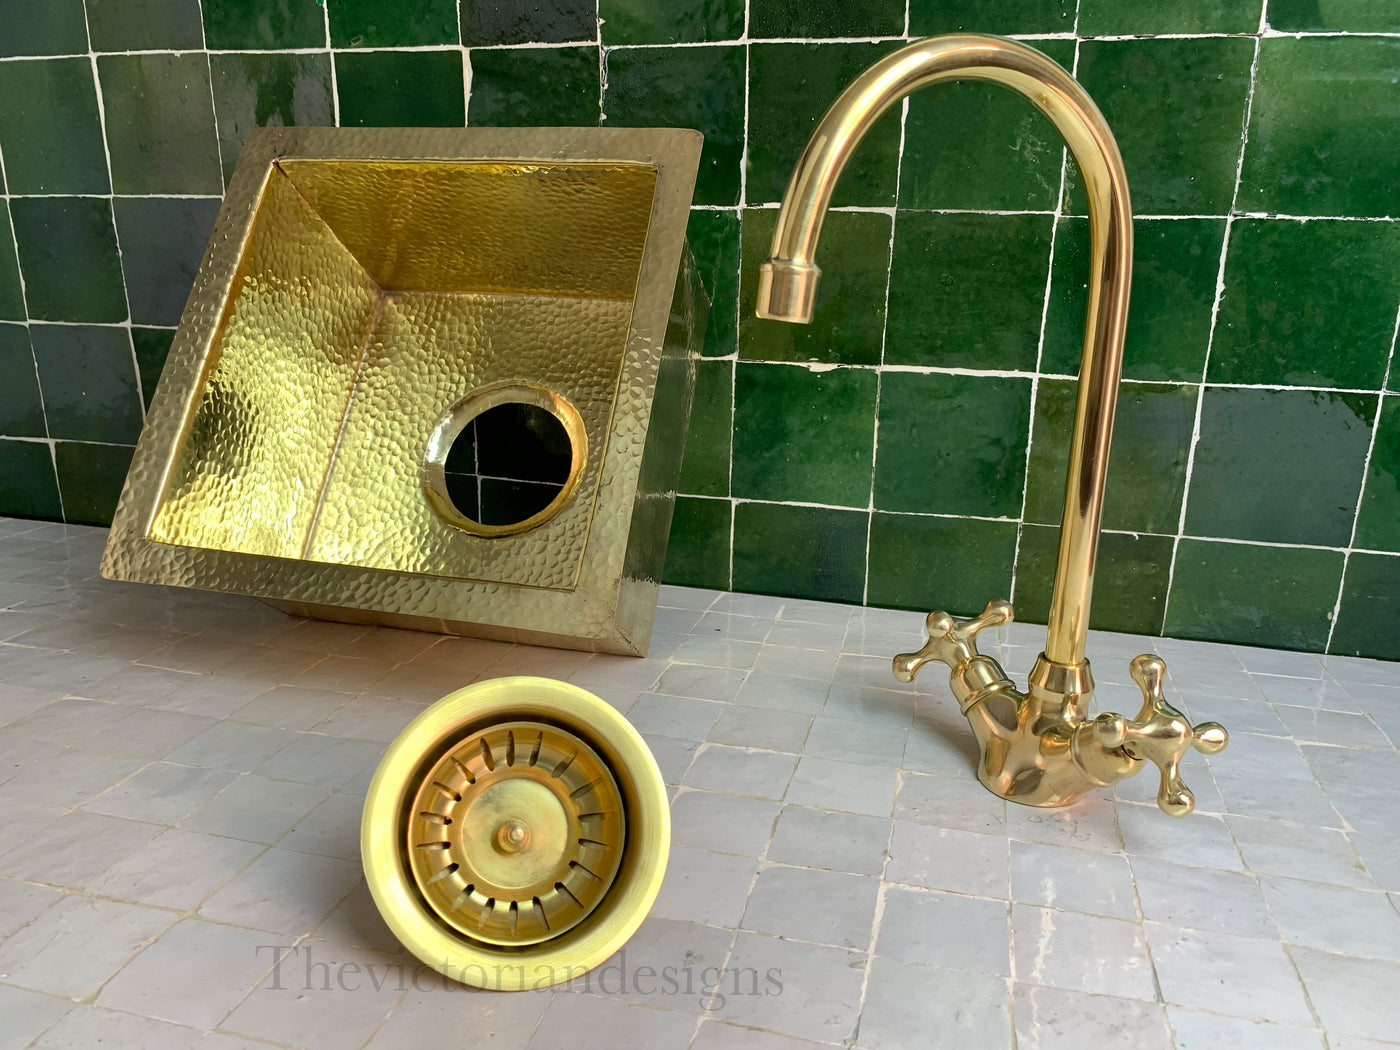 UNLACQUERED BRASS GOOSENECK FAUCET WITH SINK - Triazadesigns